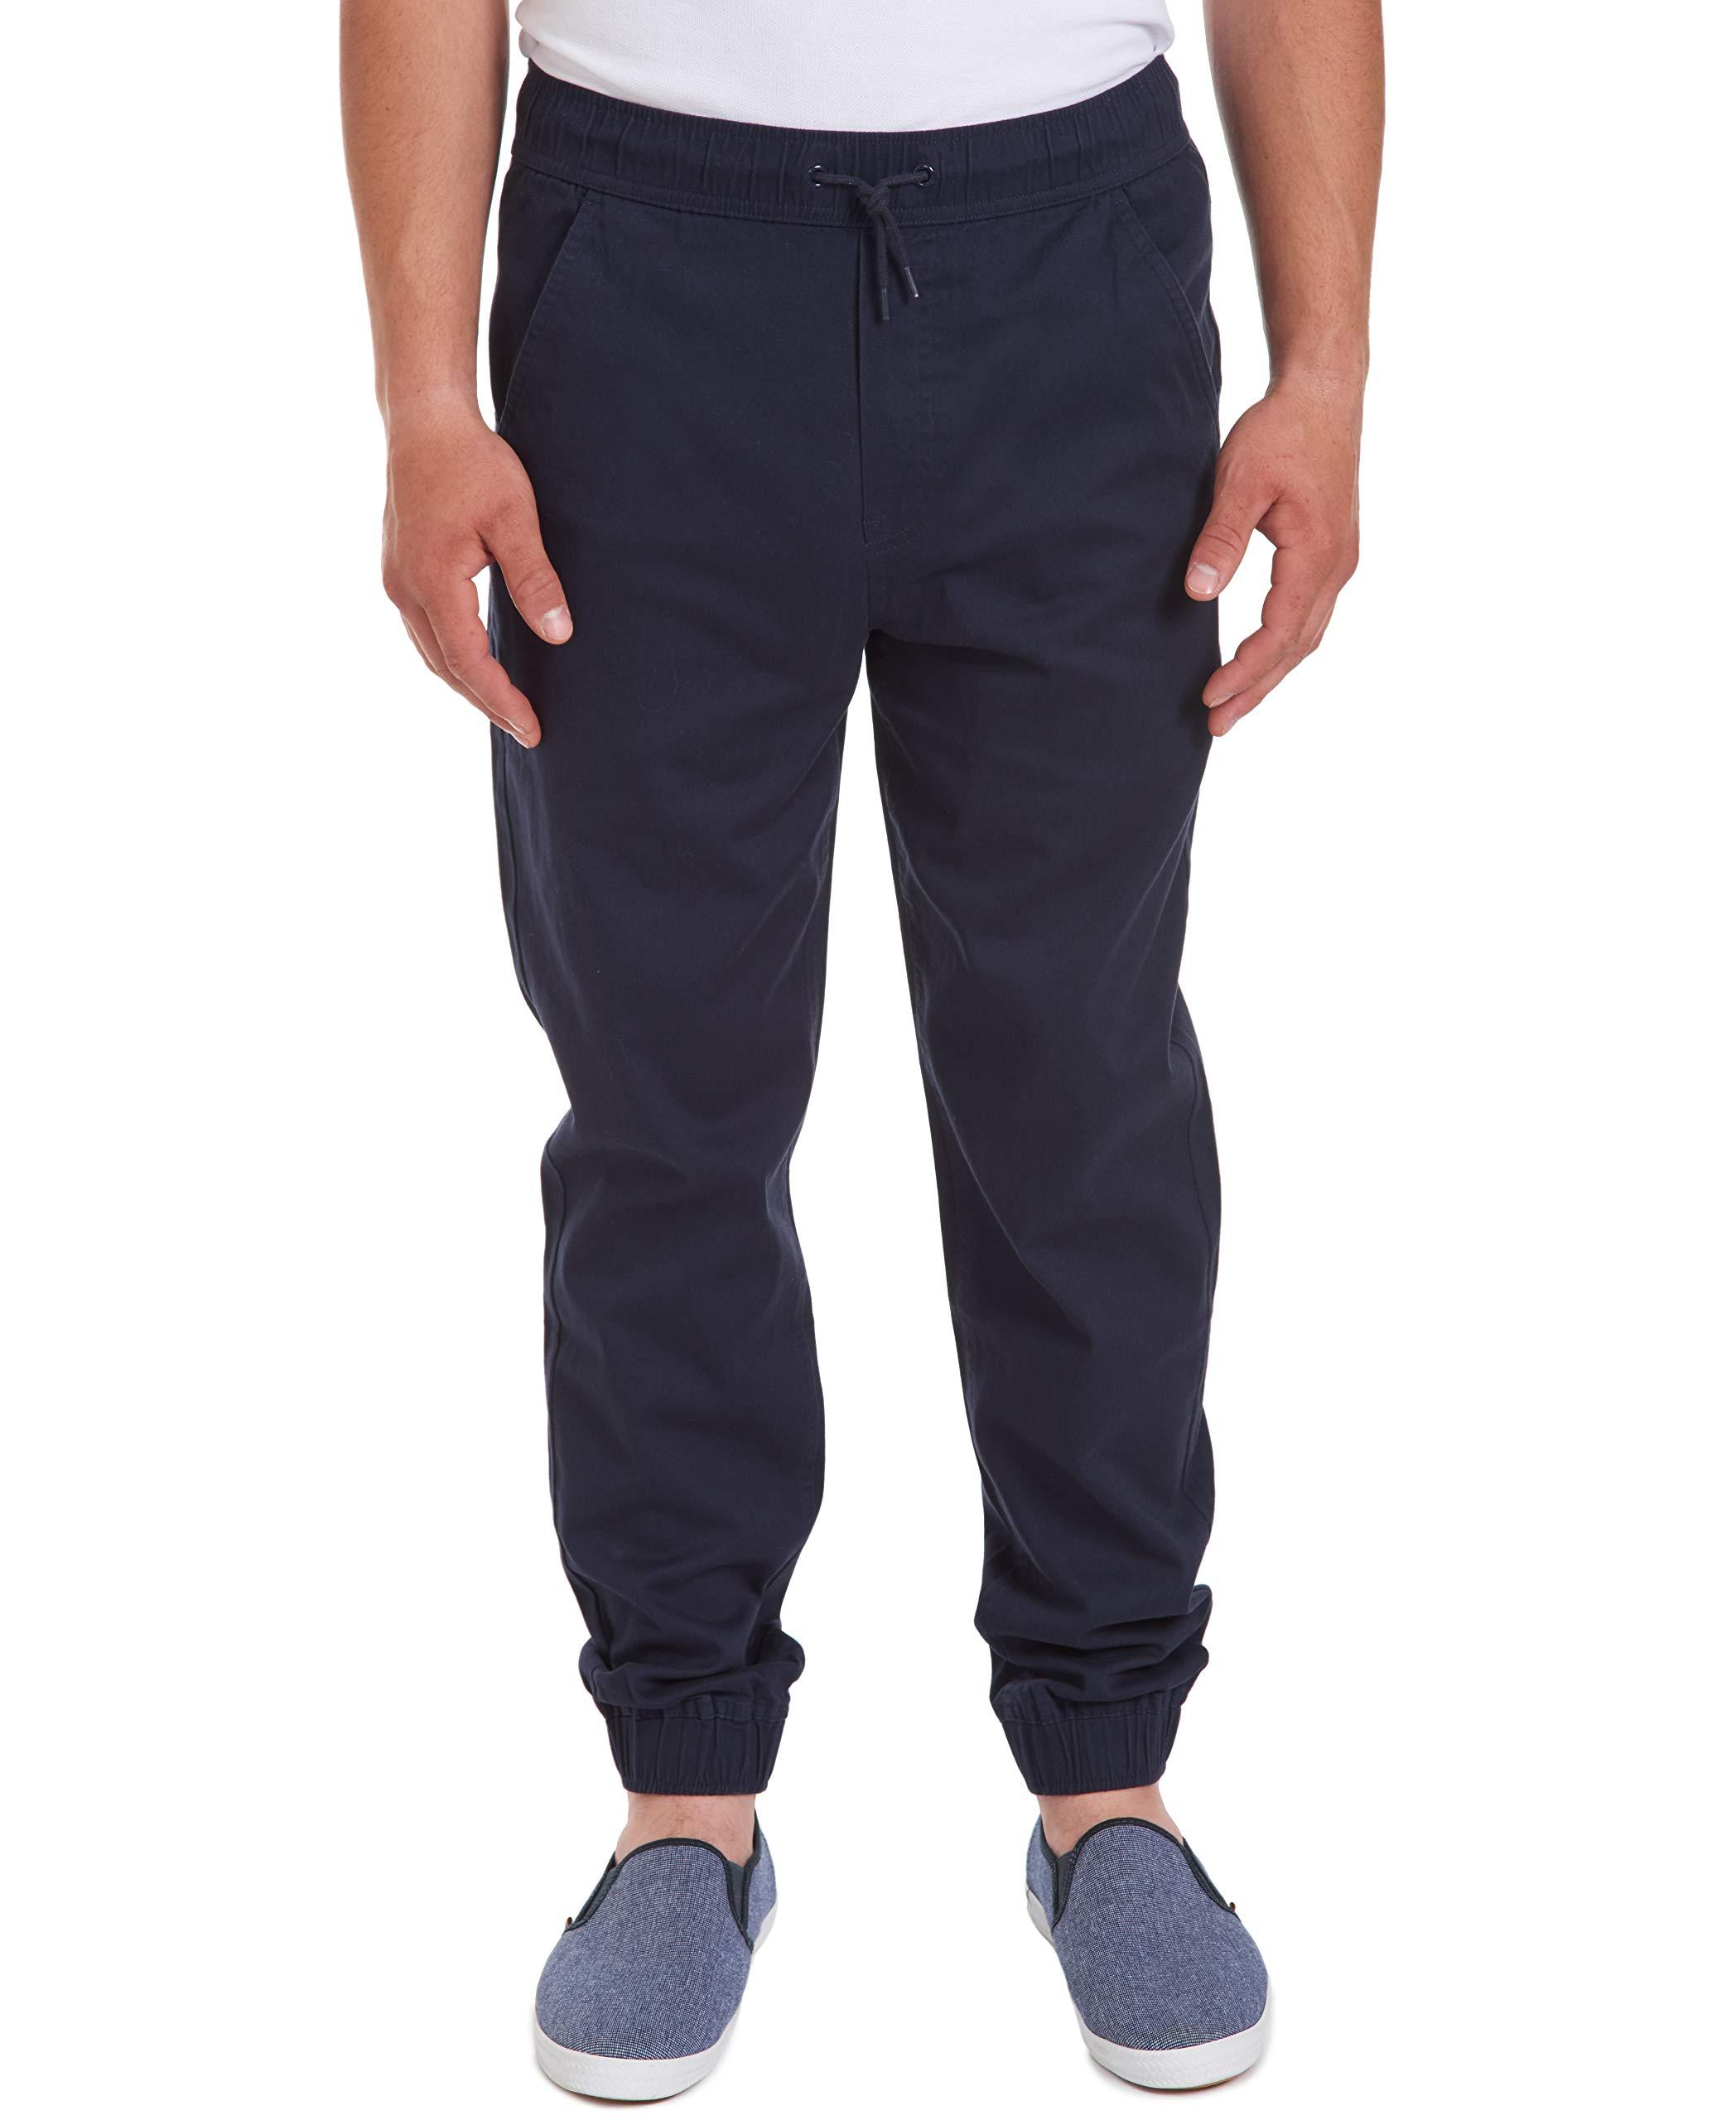 Izod Uniform Young Stretch Twill Jogger Pant in Navy (Blue) for Men - Lyst